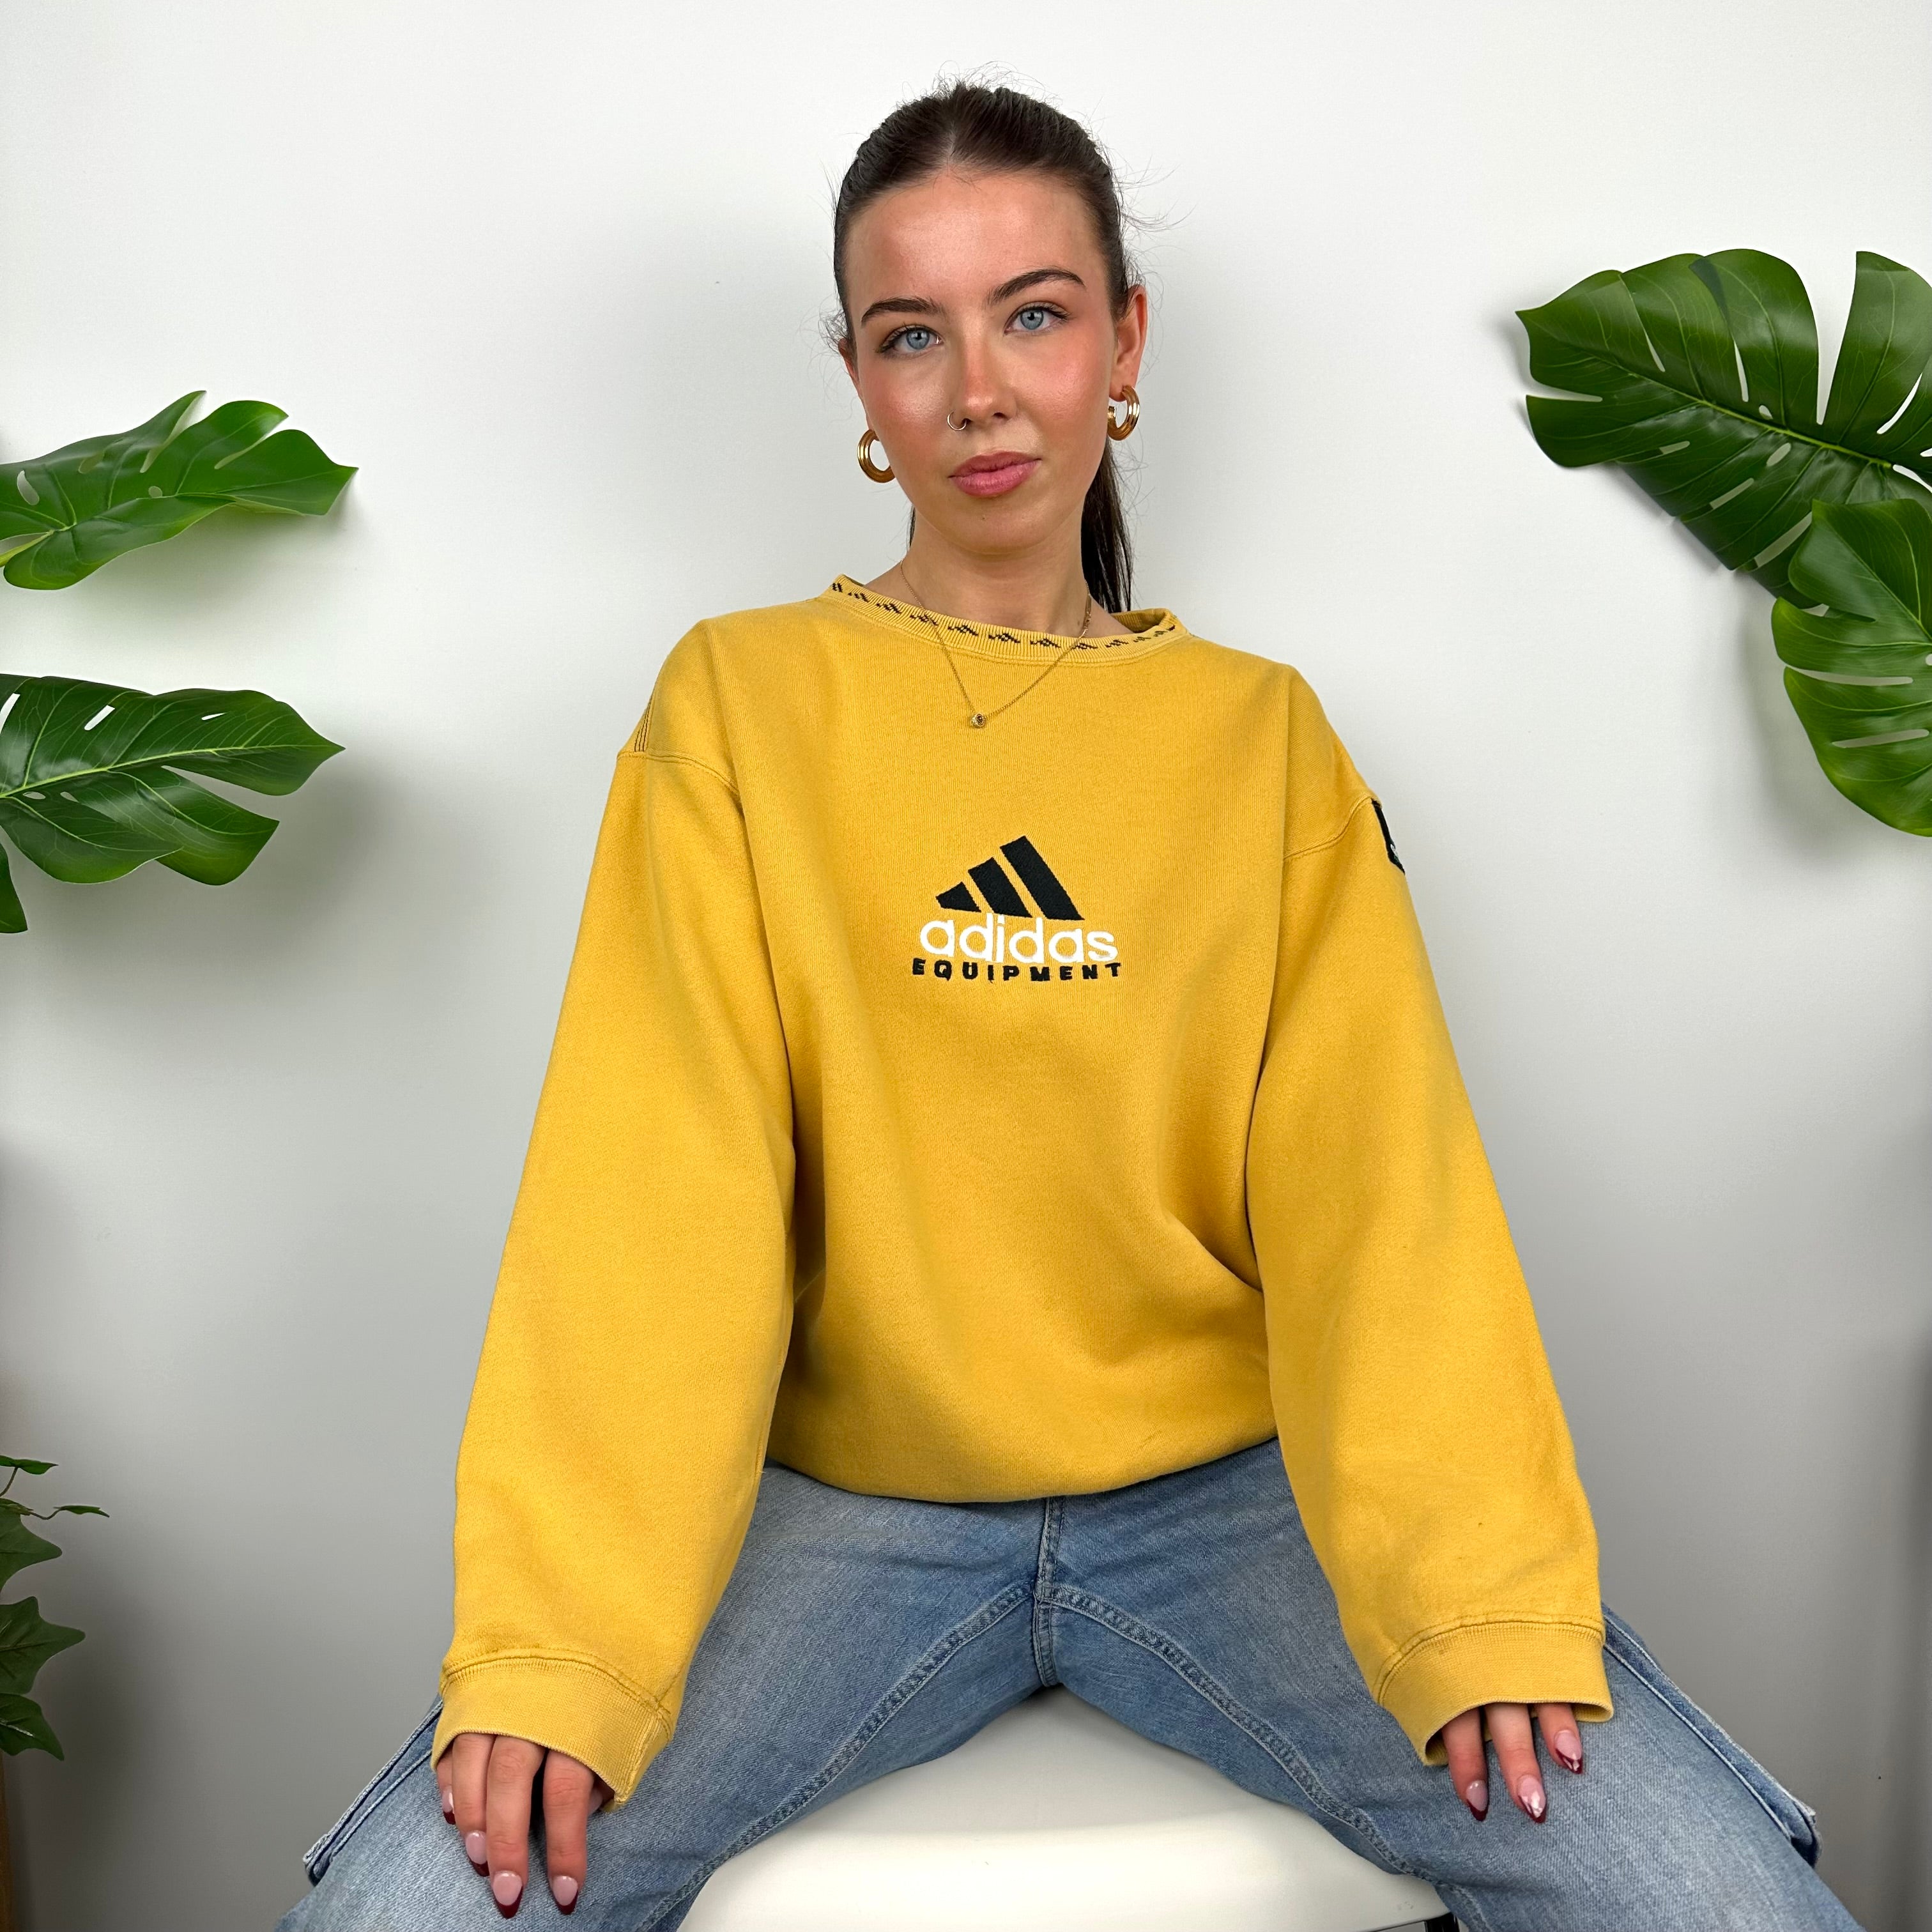 Adidas Equipment Yellow Embroidered Spell Out Sweatshirt (M)